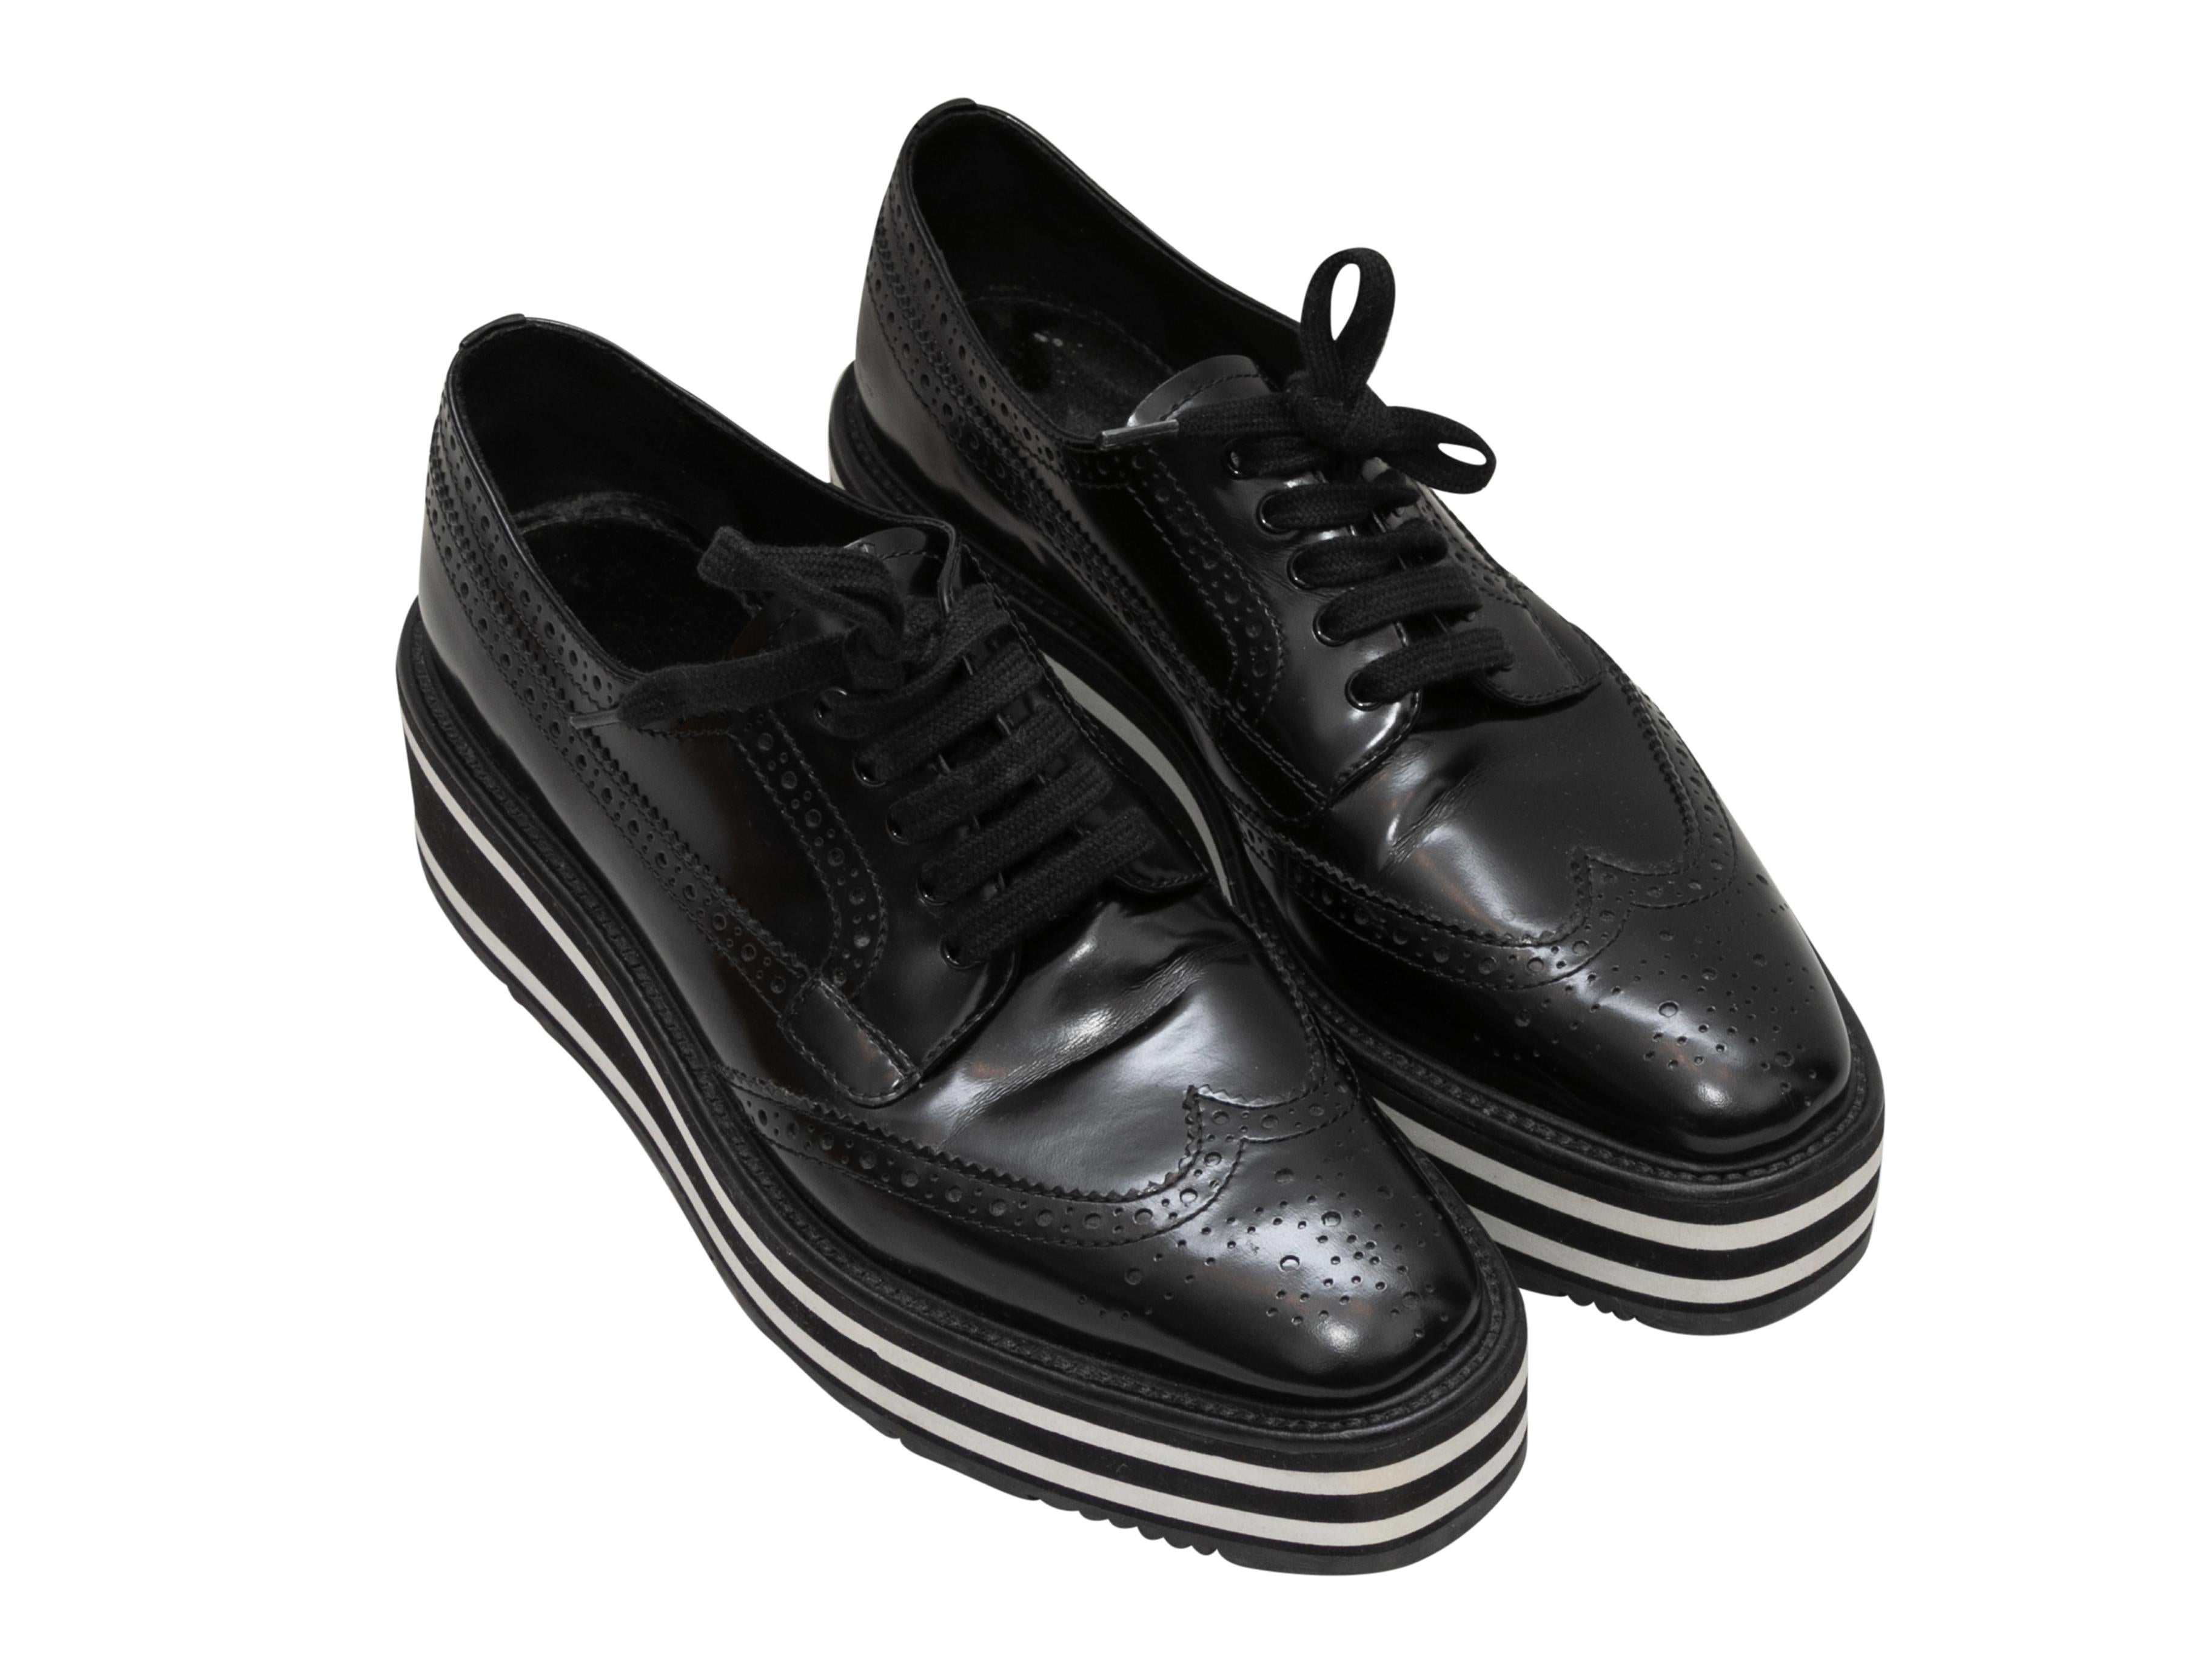 Black and white leather platform brogues by Prada. Foam rubber soles. Lace-up tie closures at tops. 1.5